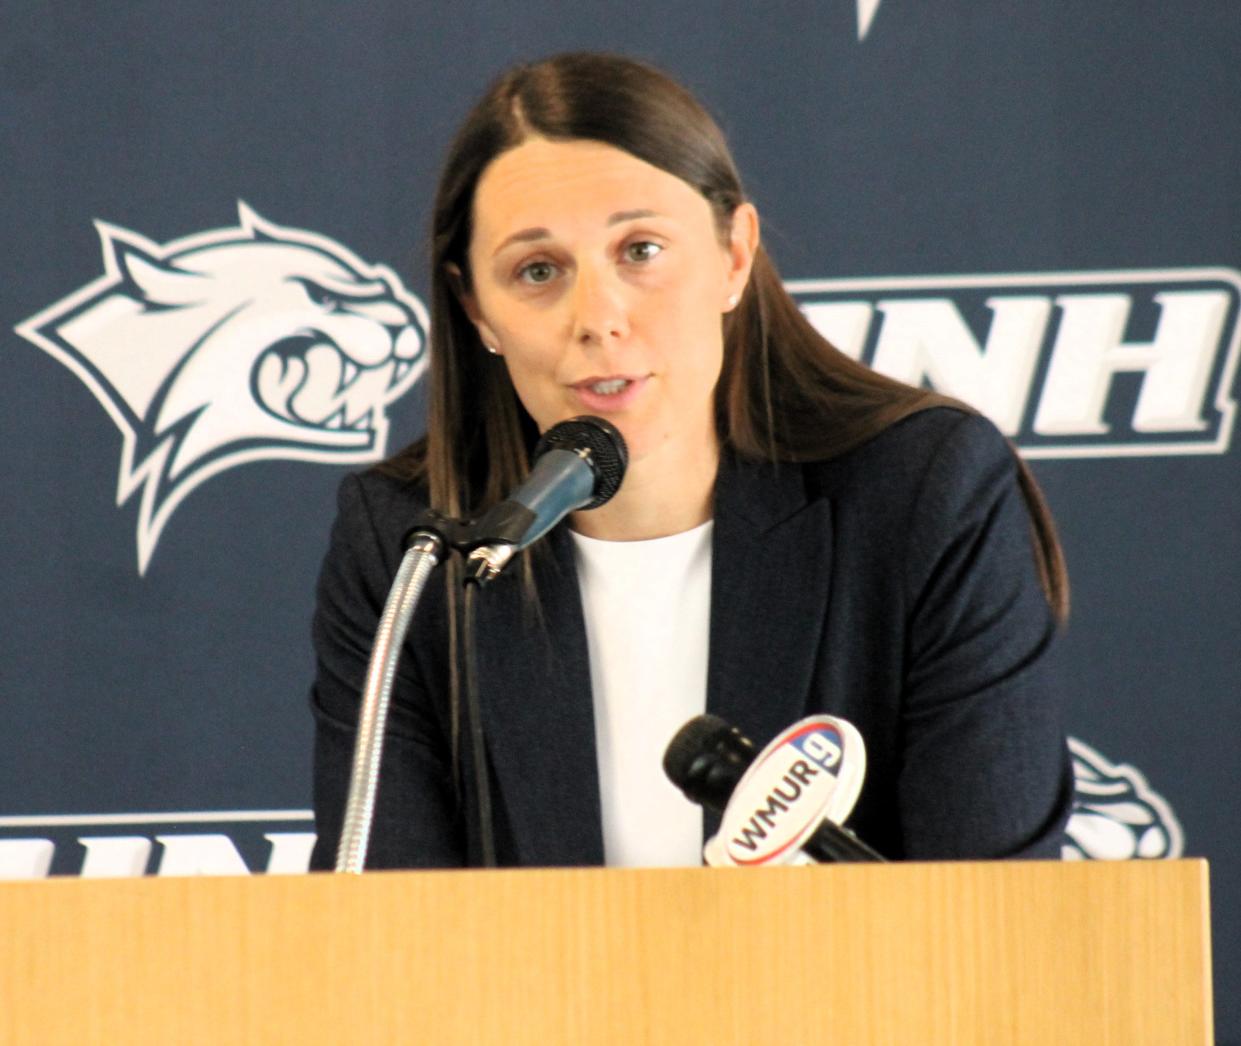 A native of Rochester, N.Y., Megan Shoniker was officially introduced as the eighth head coach of the University of New Hampshire women's basketball team.